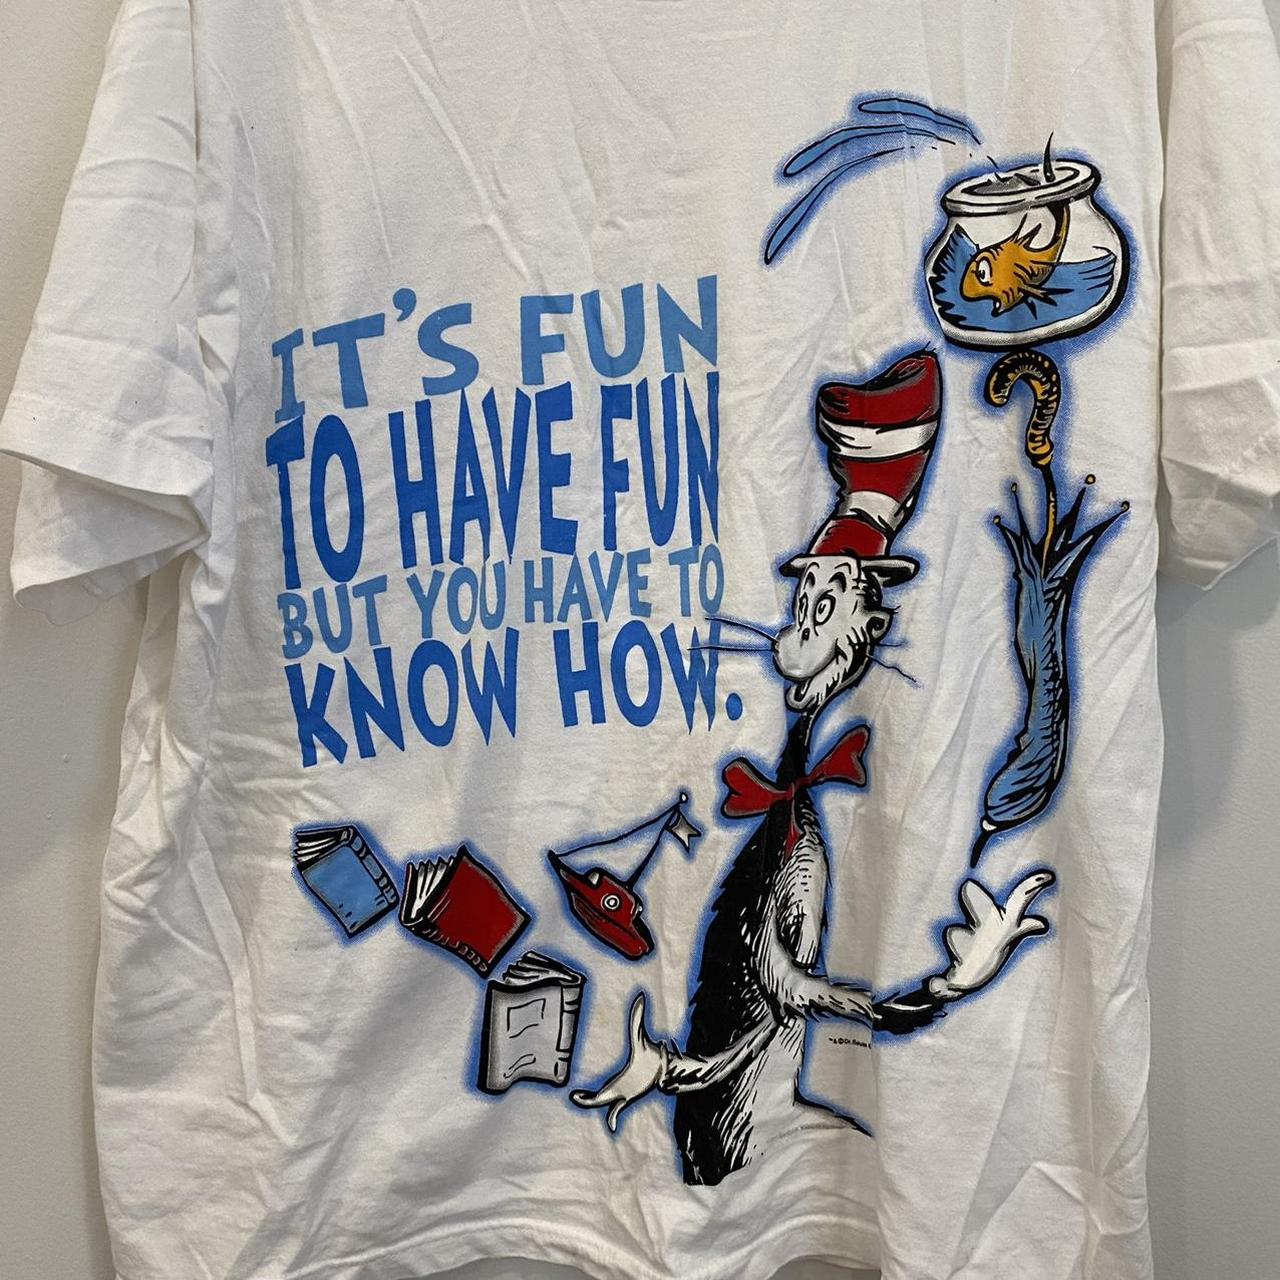 Cat in the hat t shirt - Depop